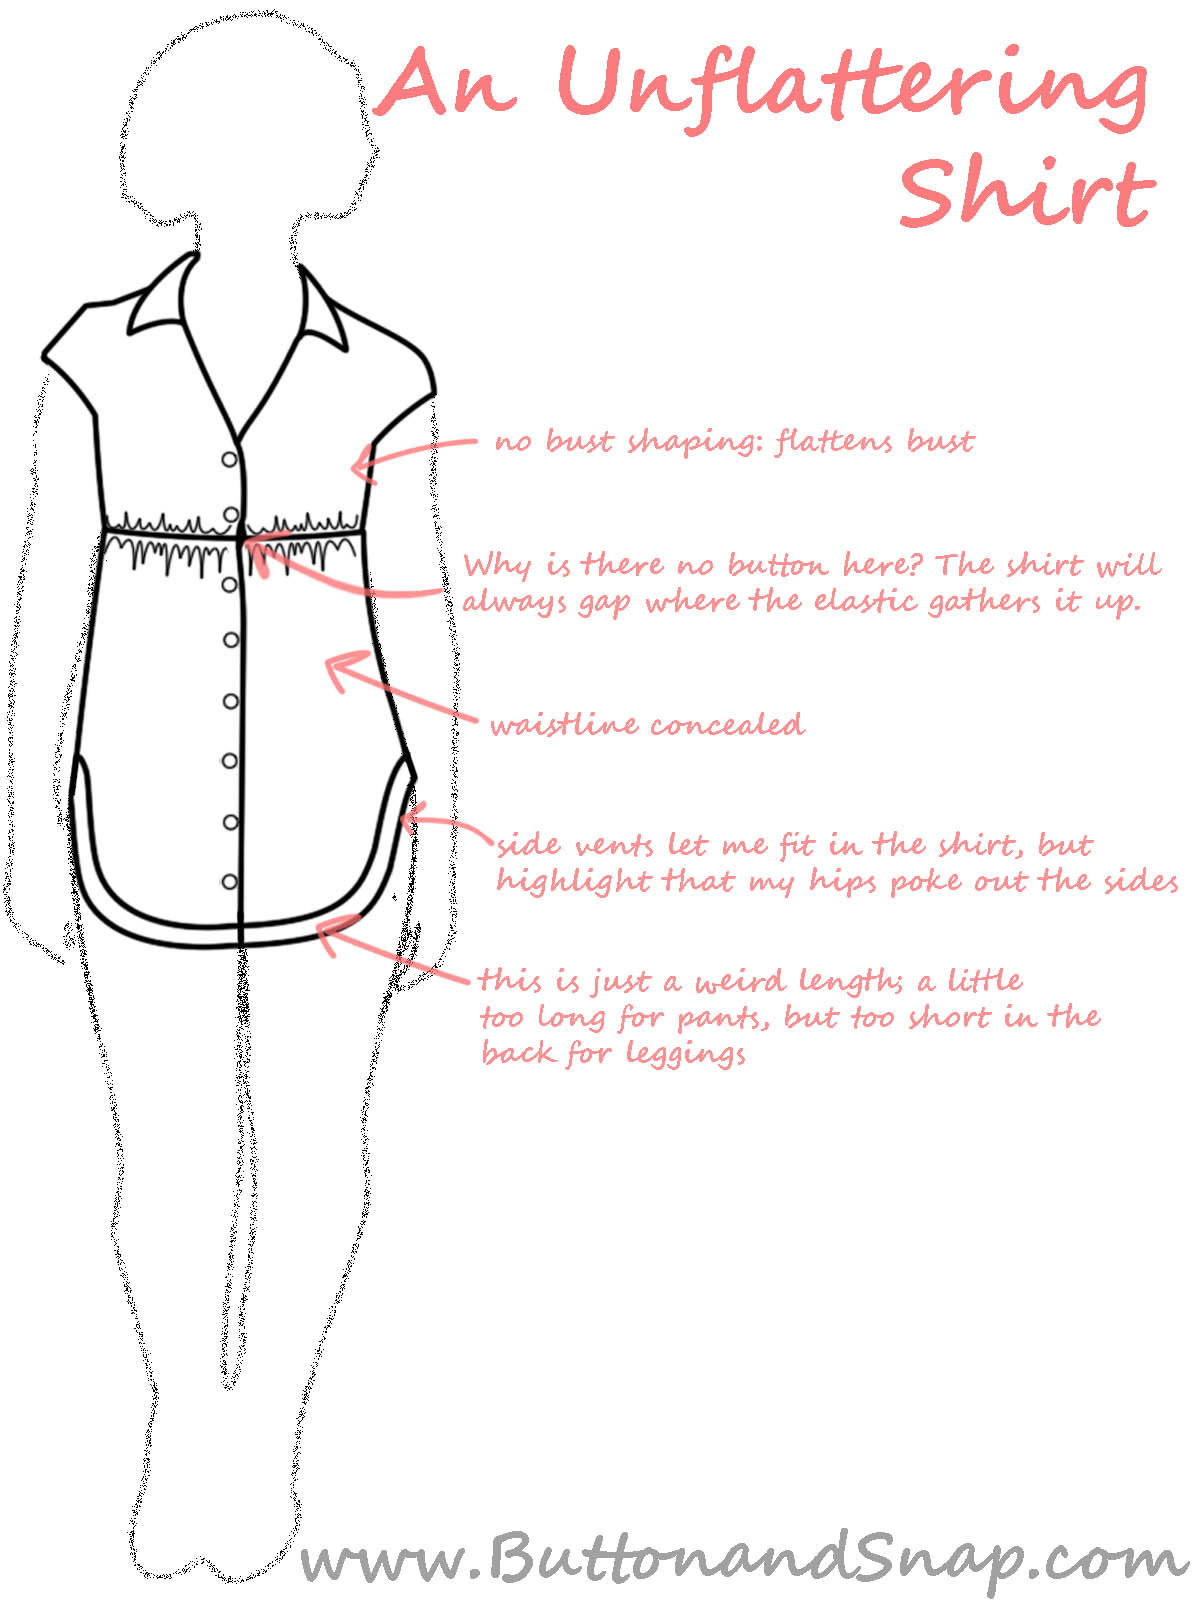 The unflattering details of a shirt